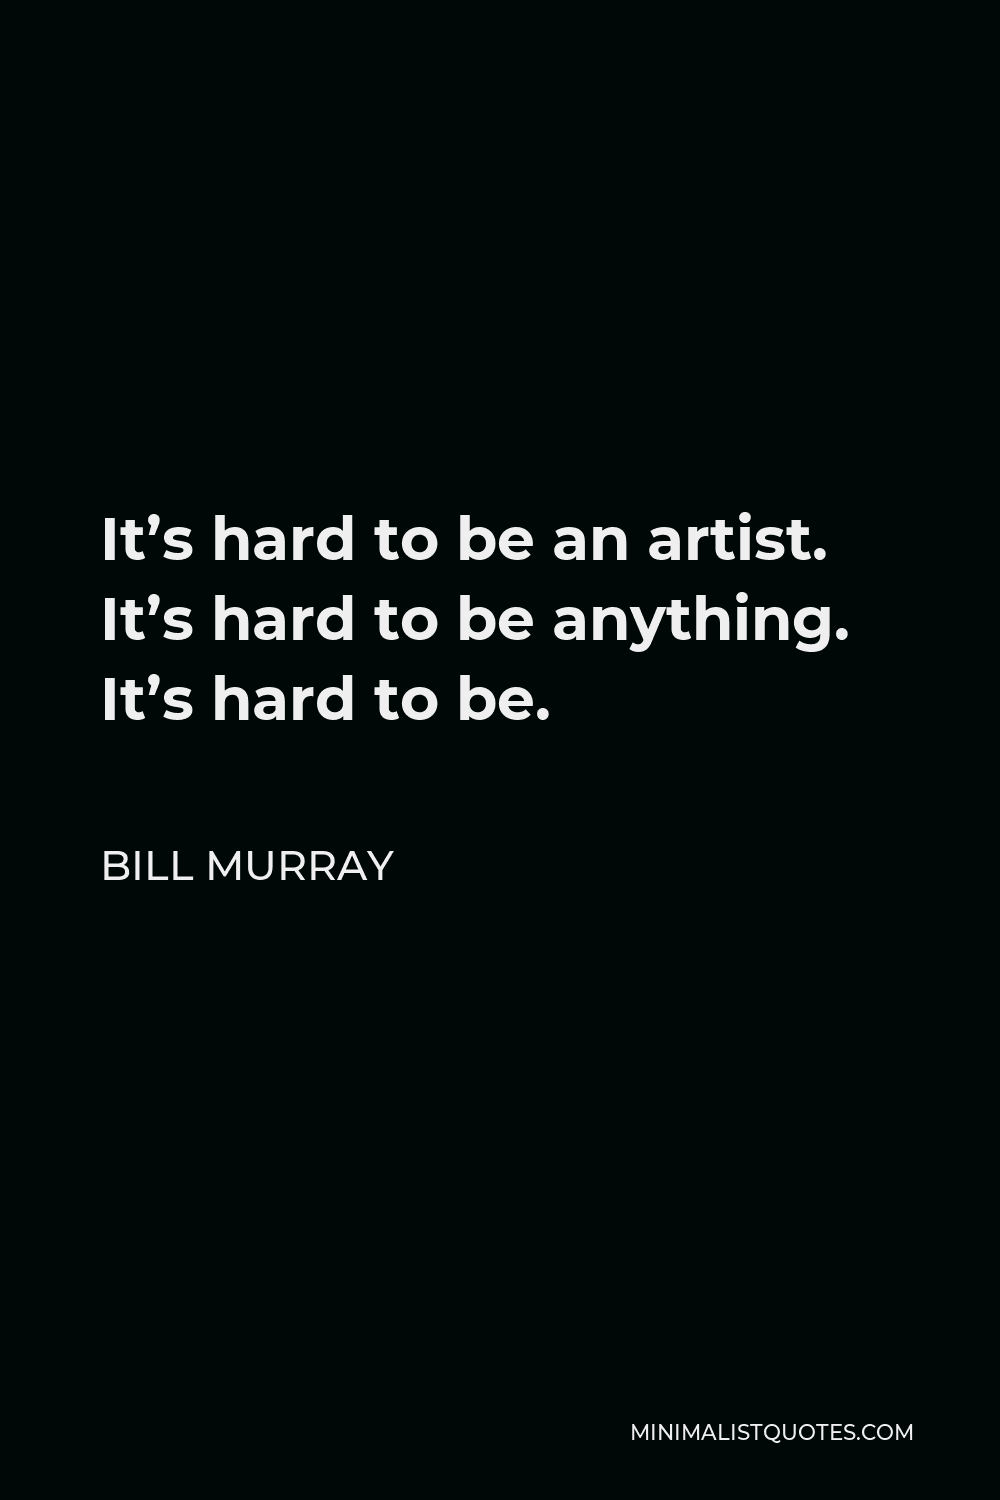 Bill Murray Quote - It’s hard to be an artist. It’s hard to be anything. It’s hard to be.